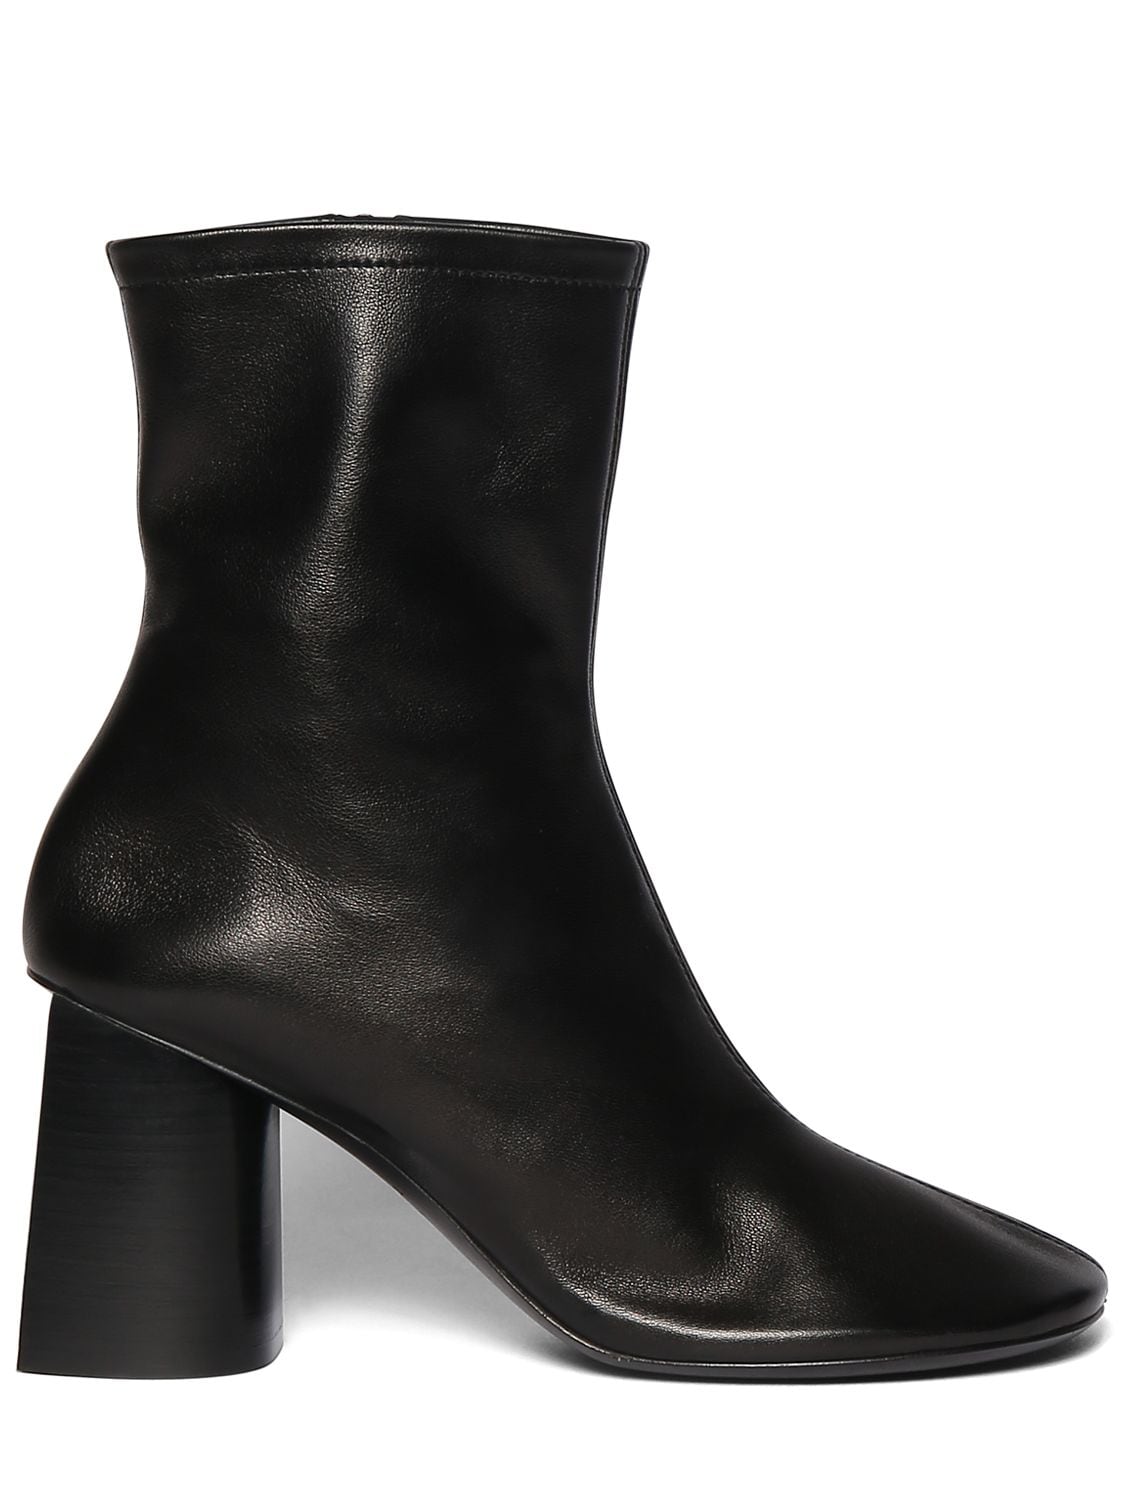 BALENCIAGA 80MM GLOVE SHINY LEATHER ANKLE BOOTS